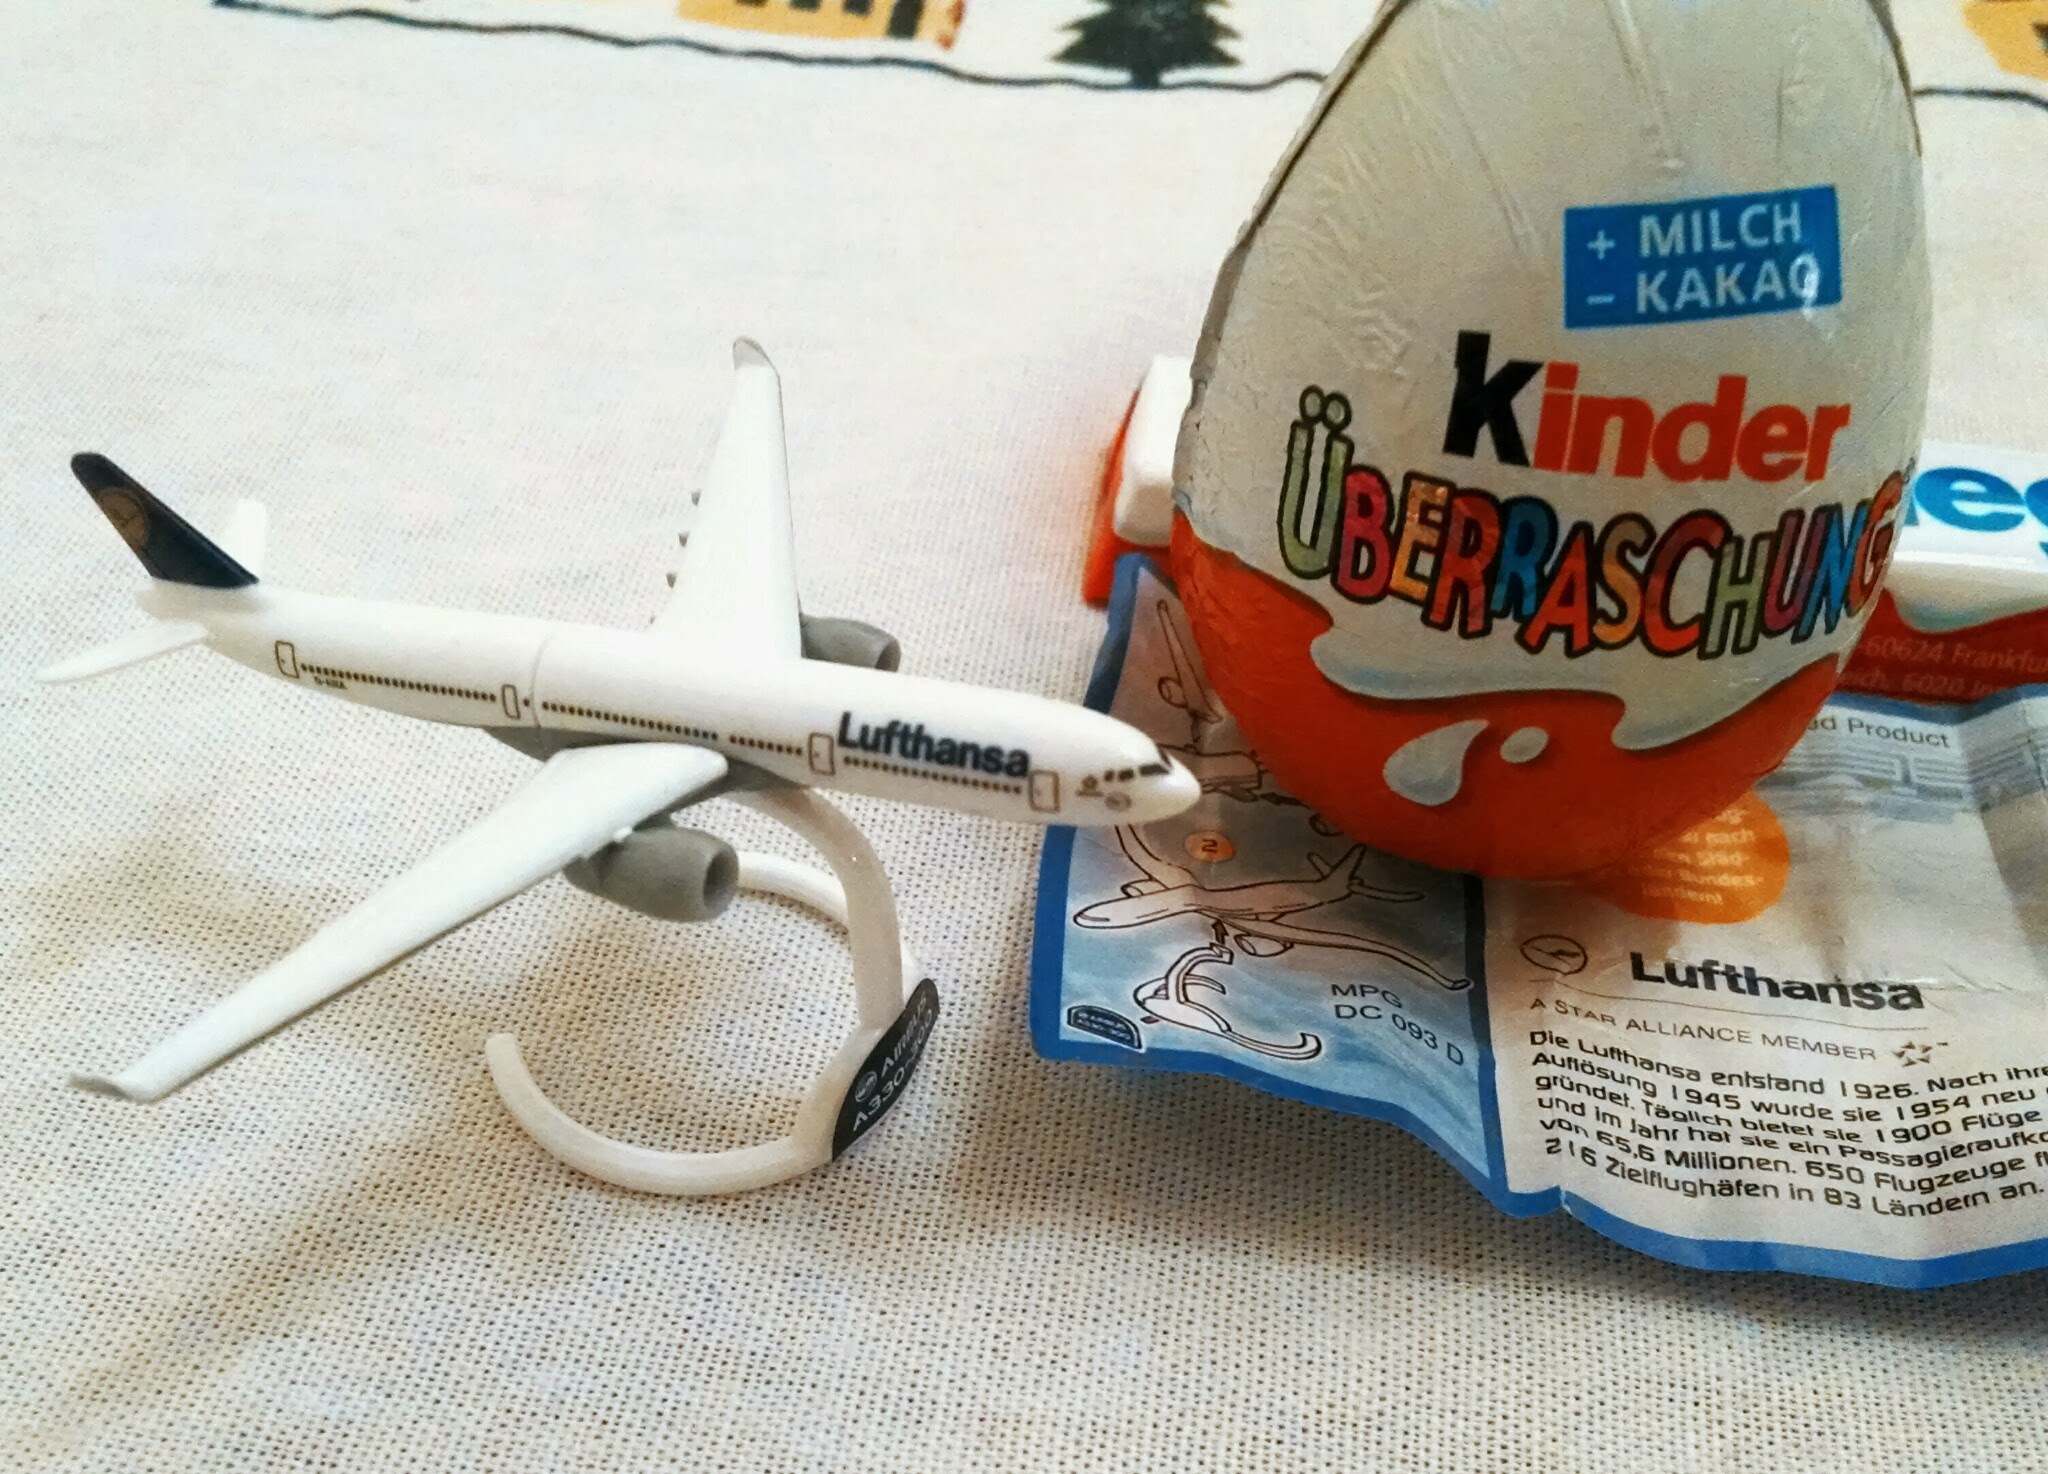 Kinder Surprises are the surprise I learned about the U.S.